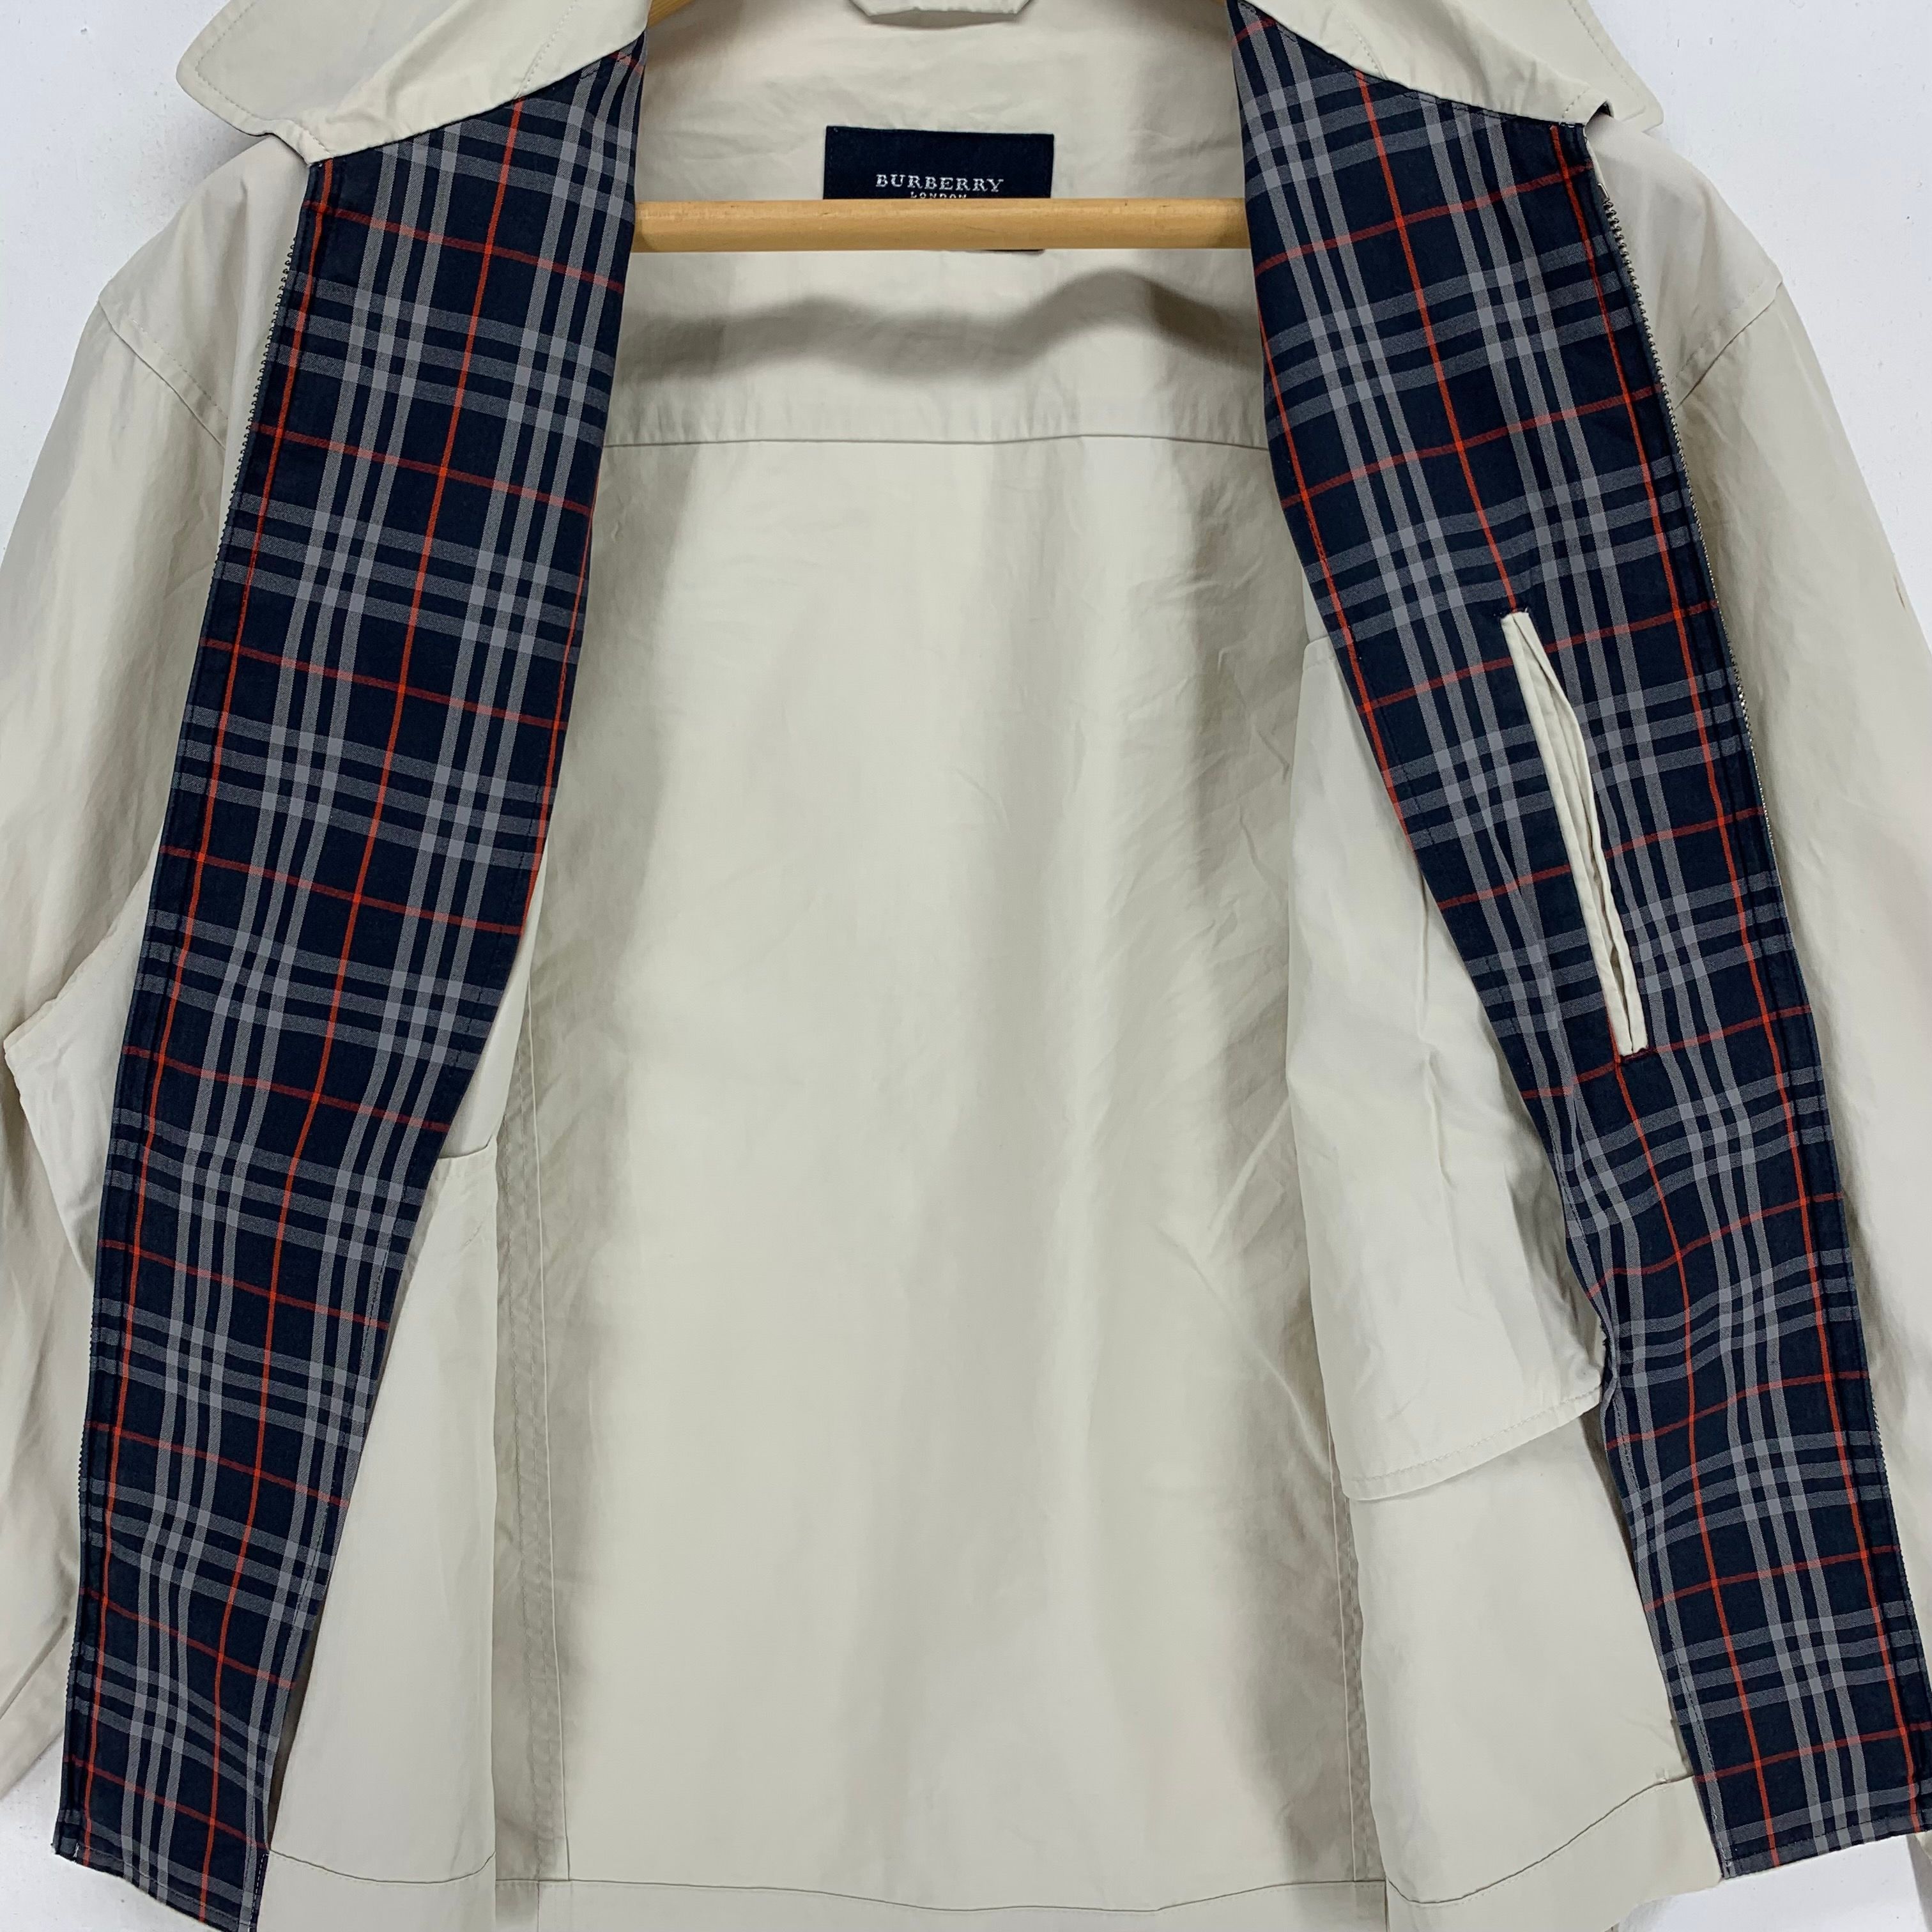 Burberry London Casual Jacket #3280-117 - 7